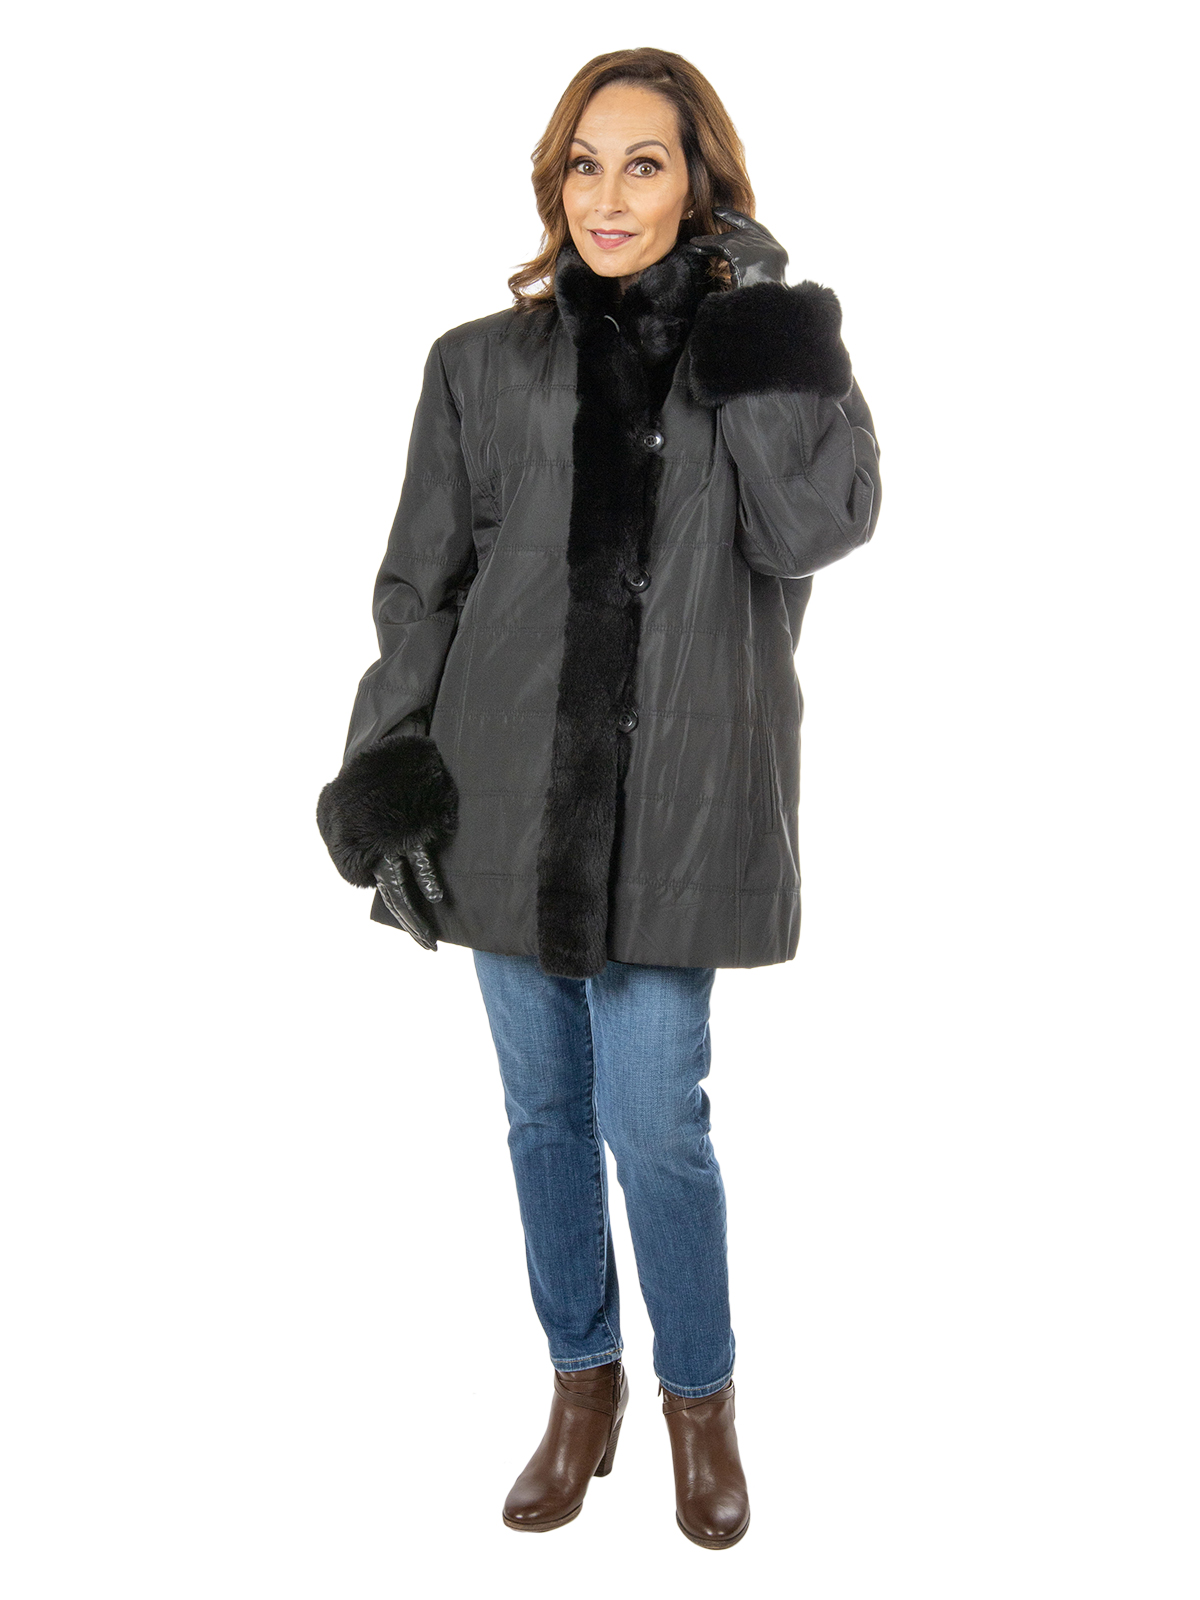 Women's Black Quilted Cloth Jacket with Zipout Rex Rabbit Liner